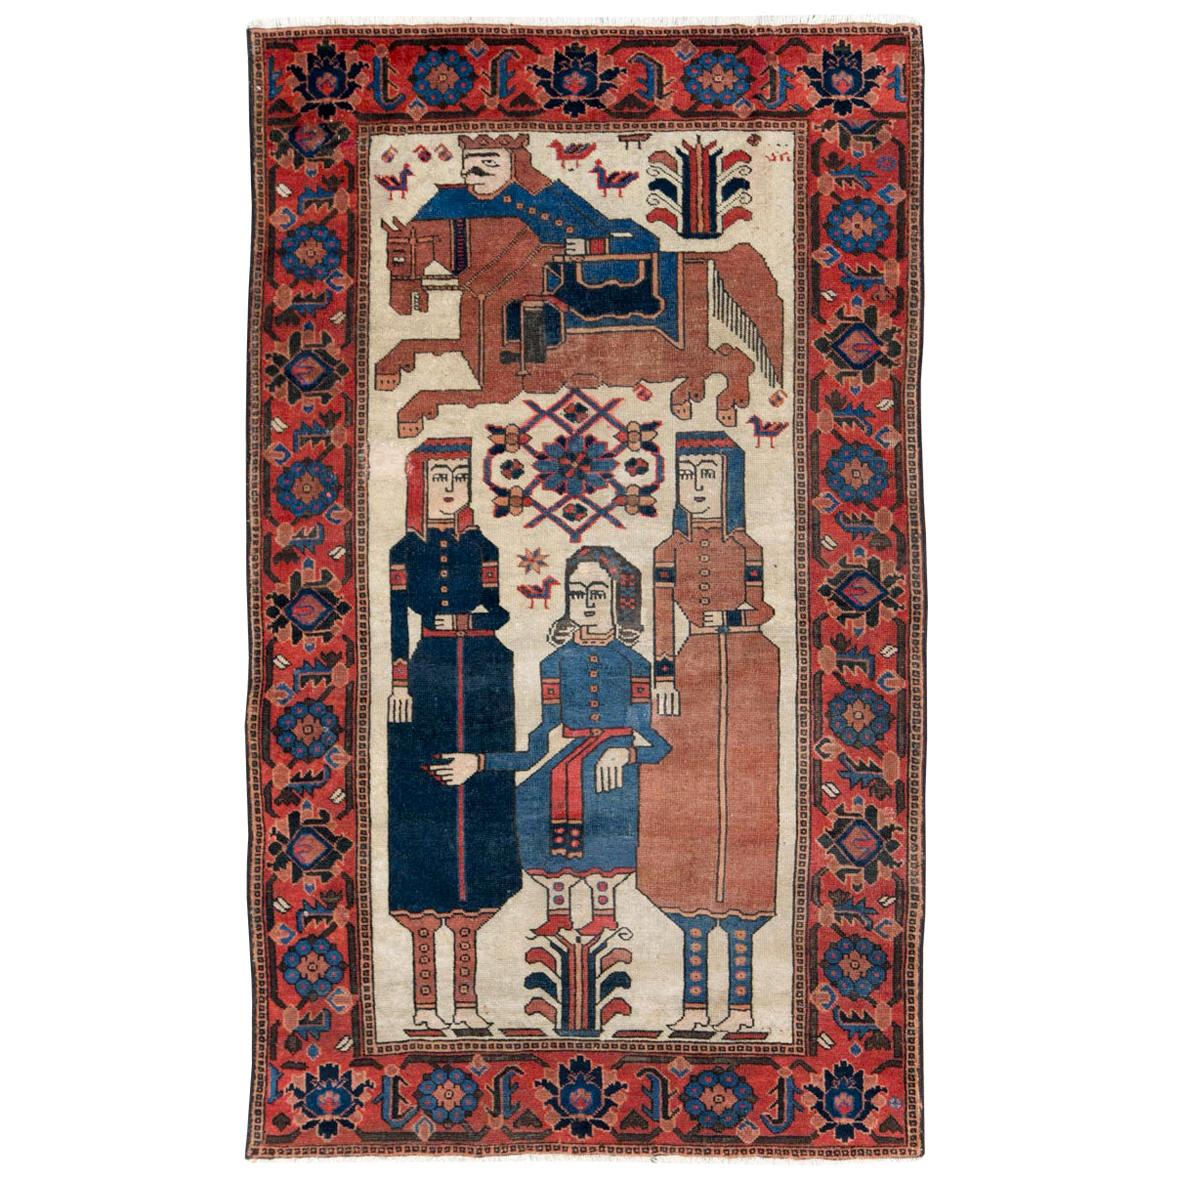 Early 20th Century Handmade Persian Kurd Pictorial Accent Rug